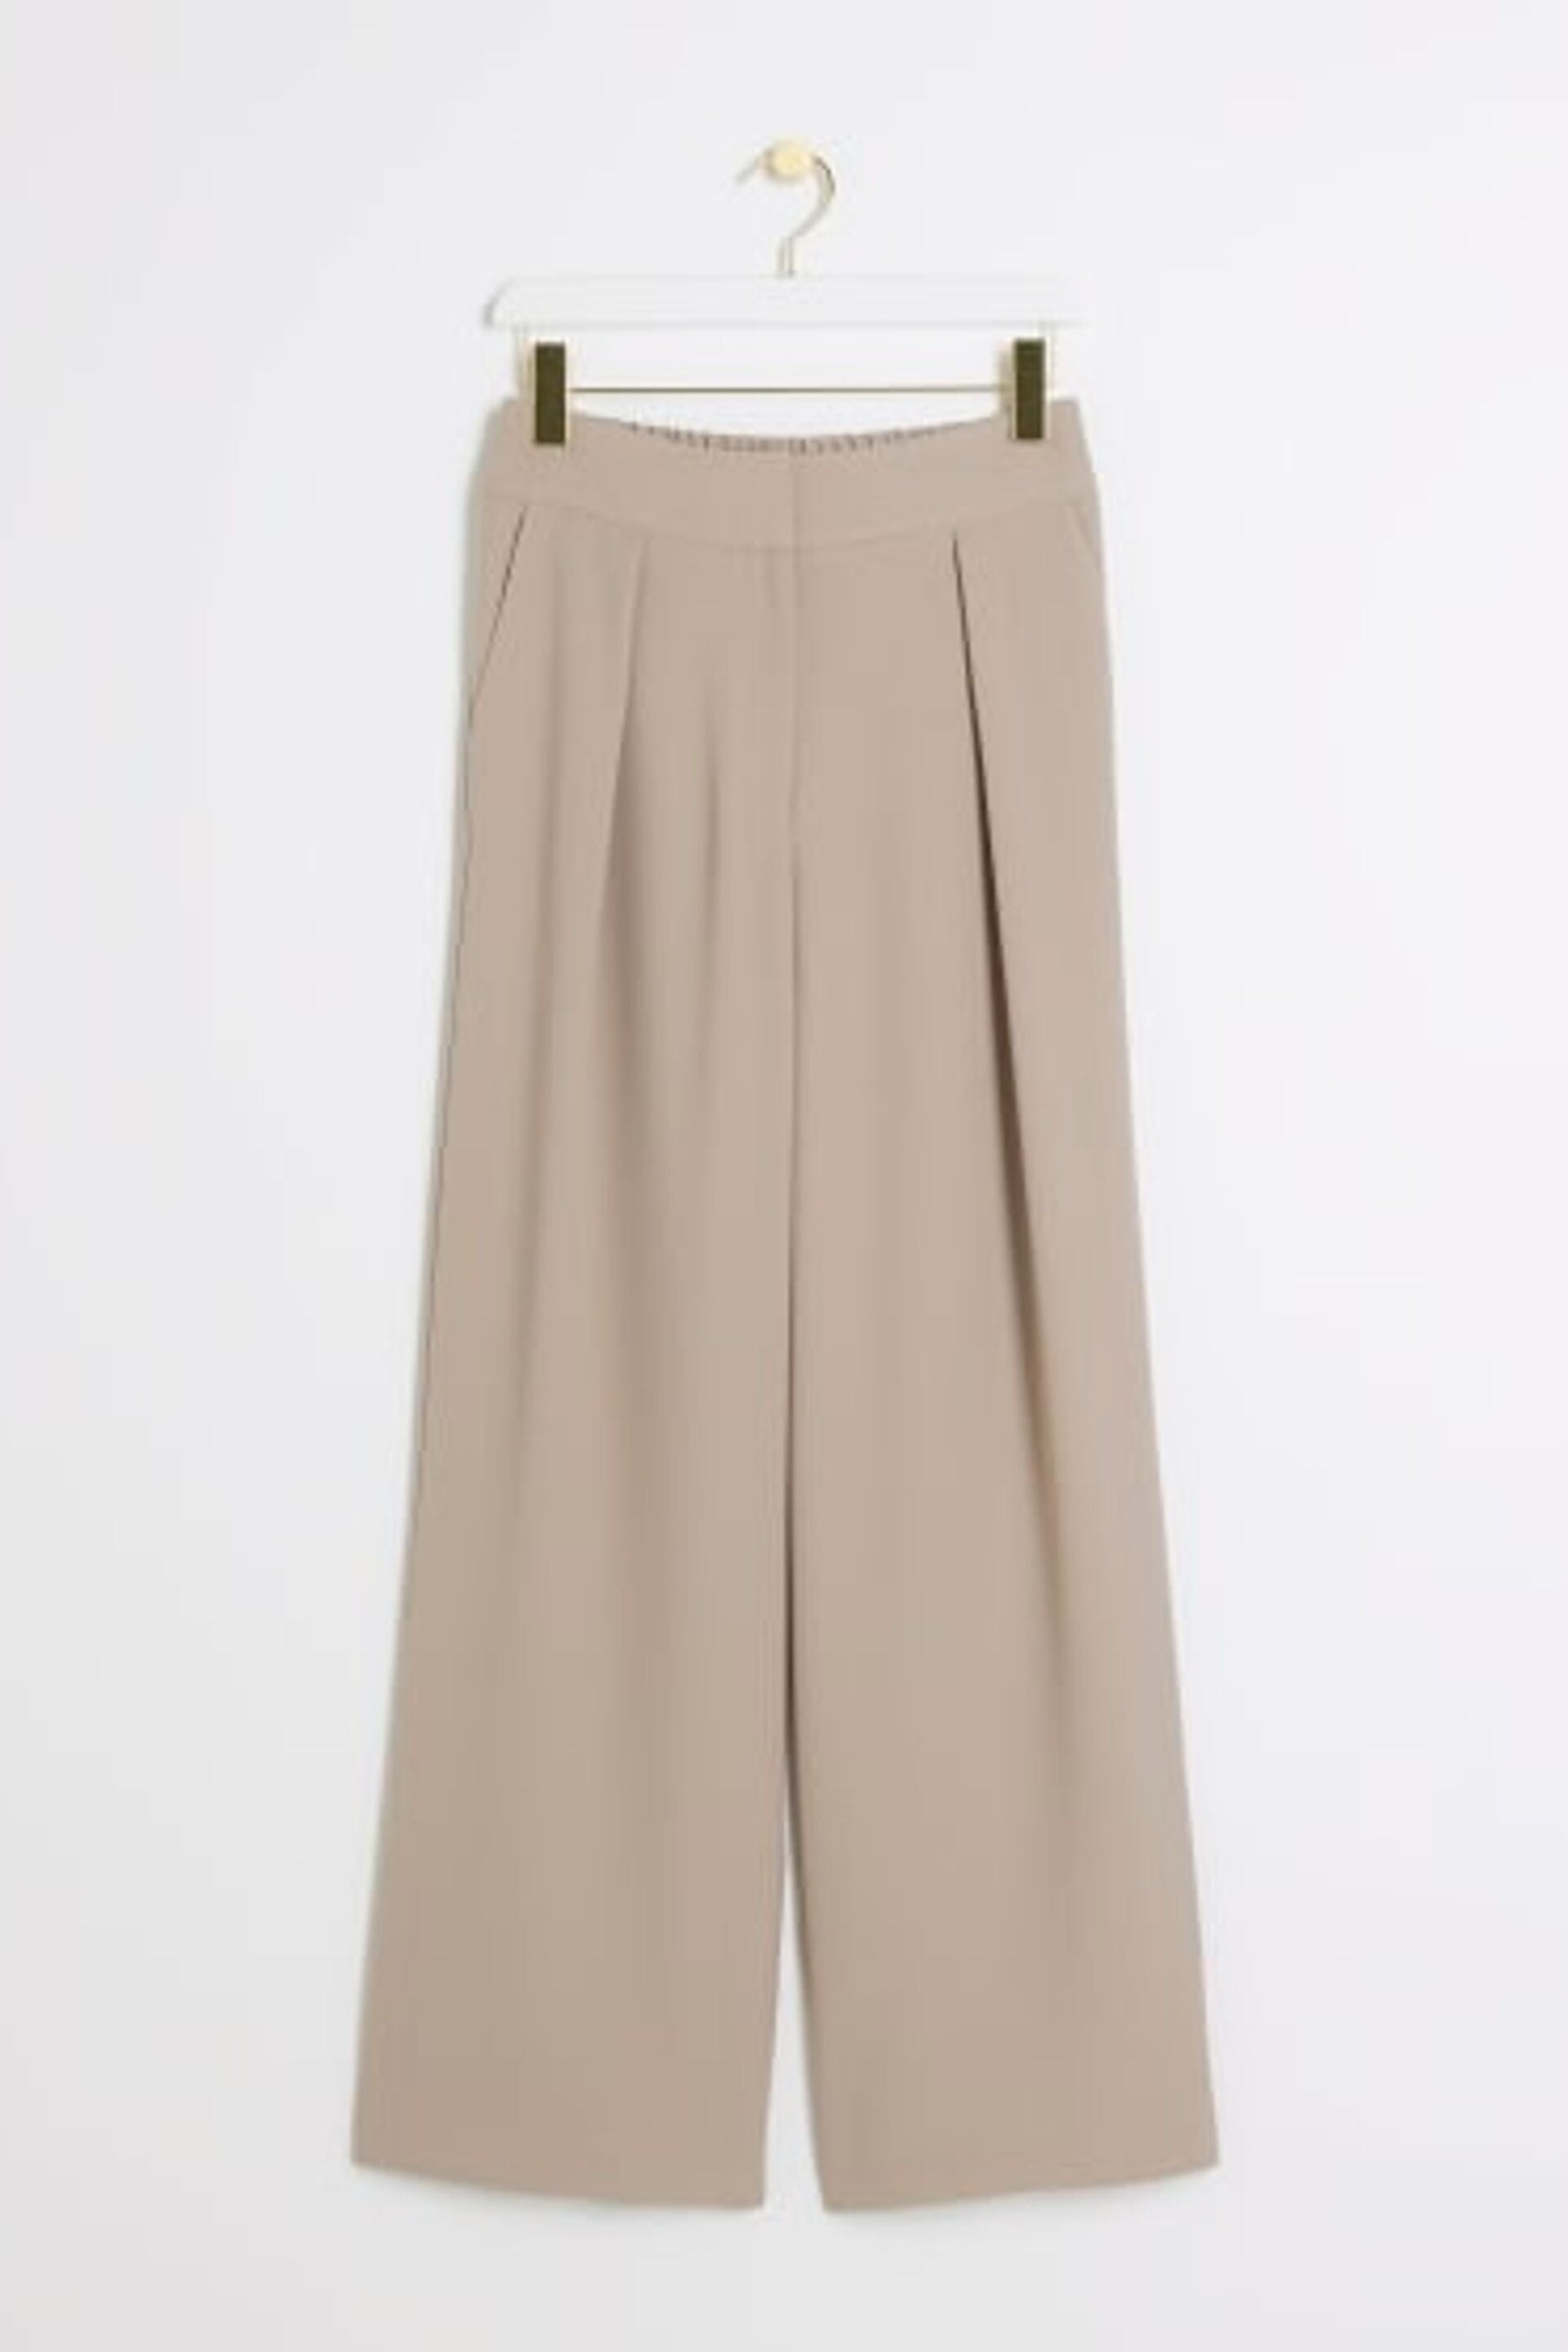 River Island Beige Wide Leg Pleated Tailored Trousers - Image 5 of 6